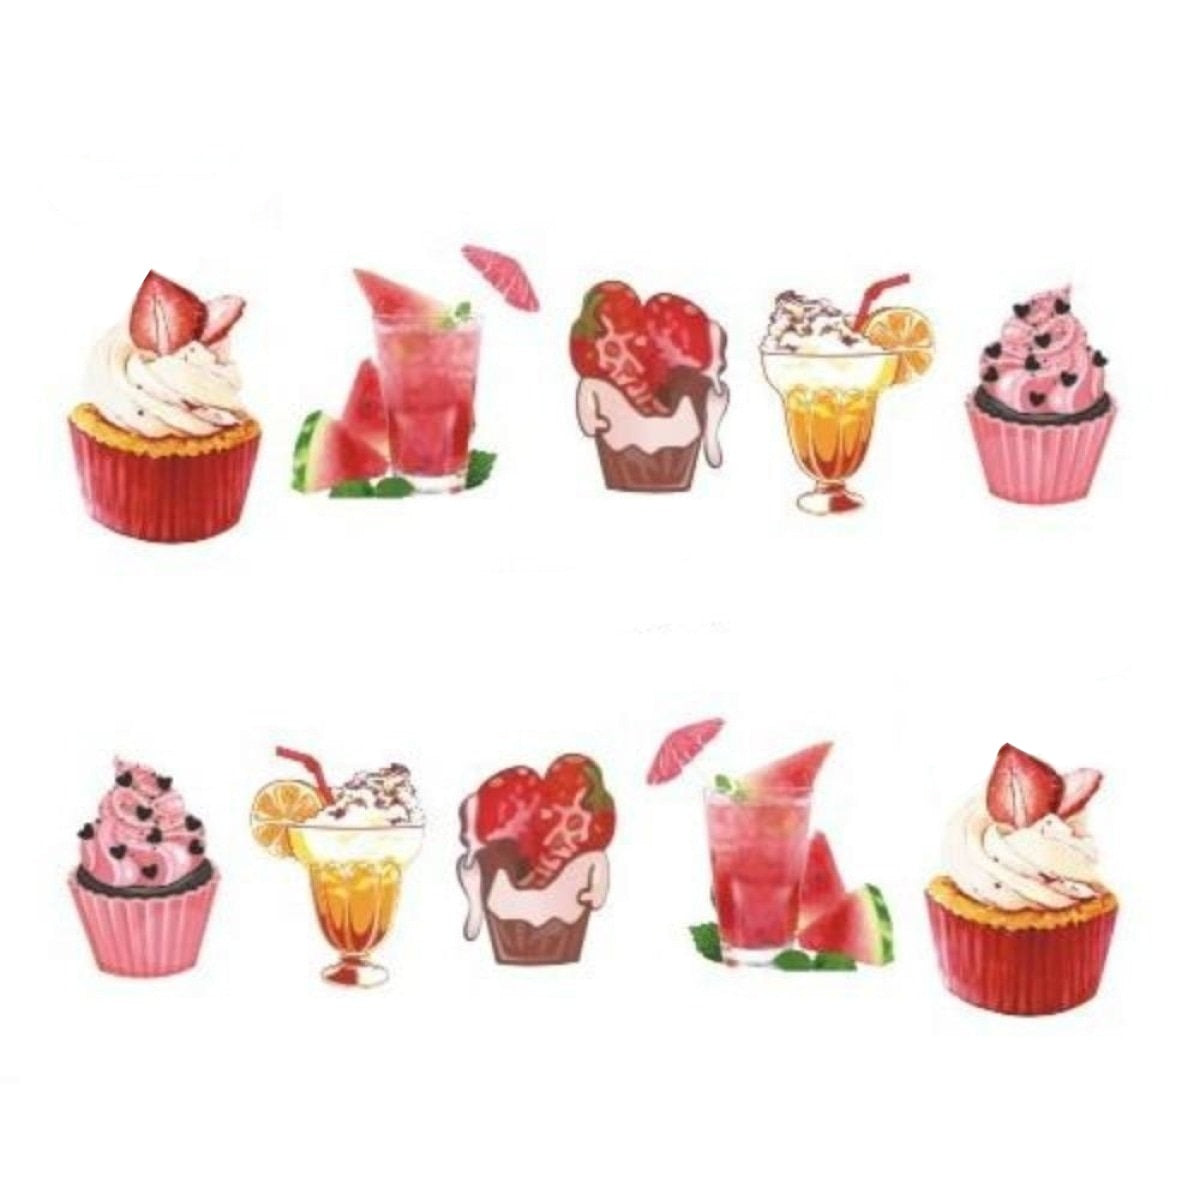 Strawberry Summer Cake & Fruit Stickers For Nails Nail Manicure Art Stz-474 - Sheet